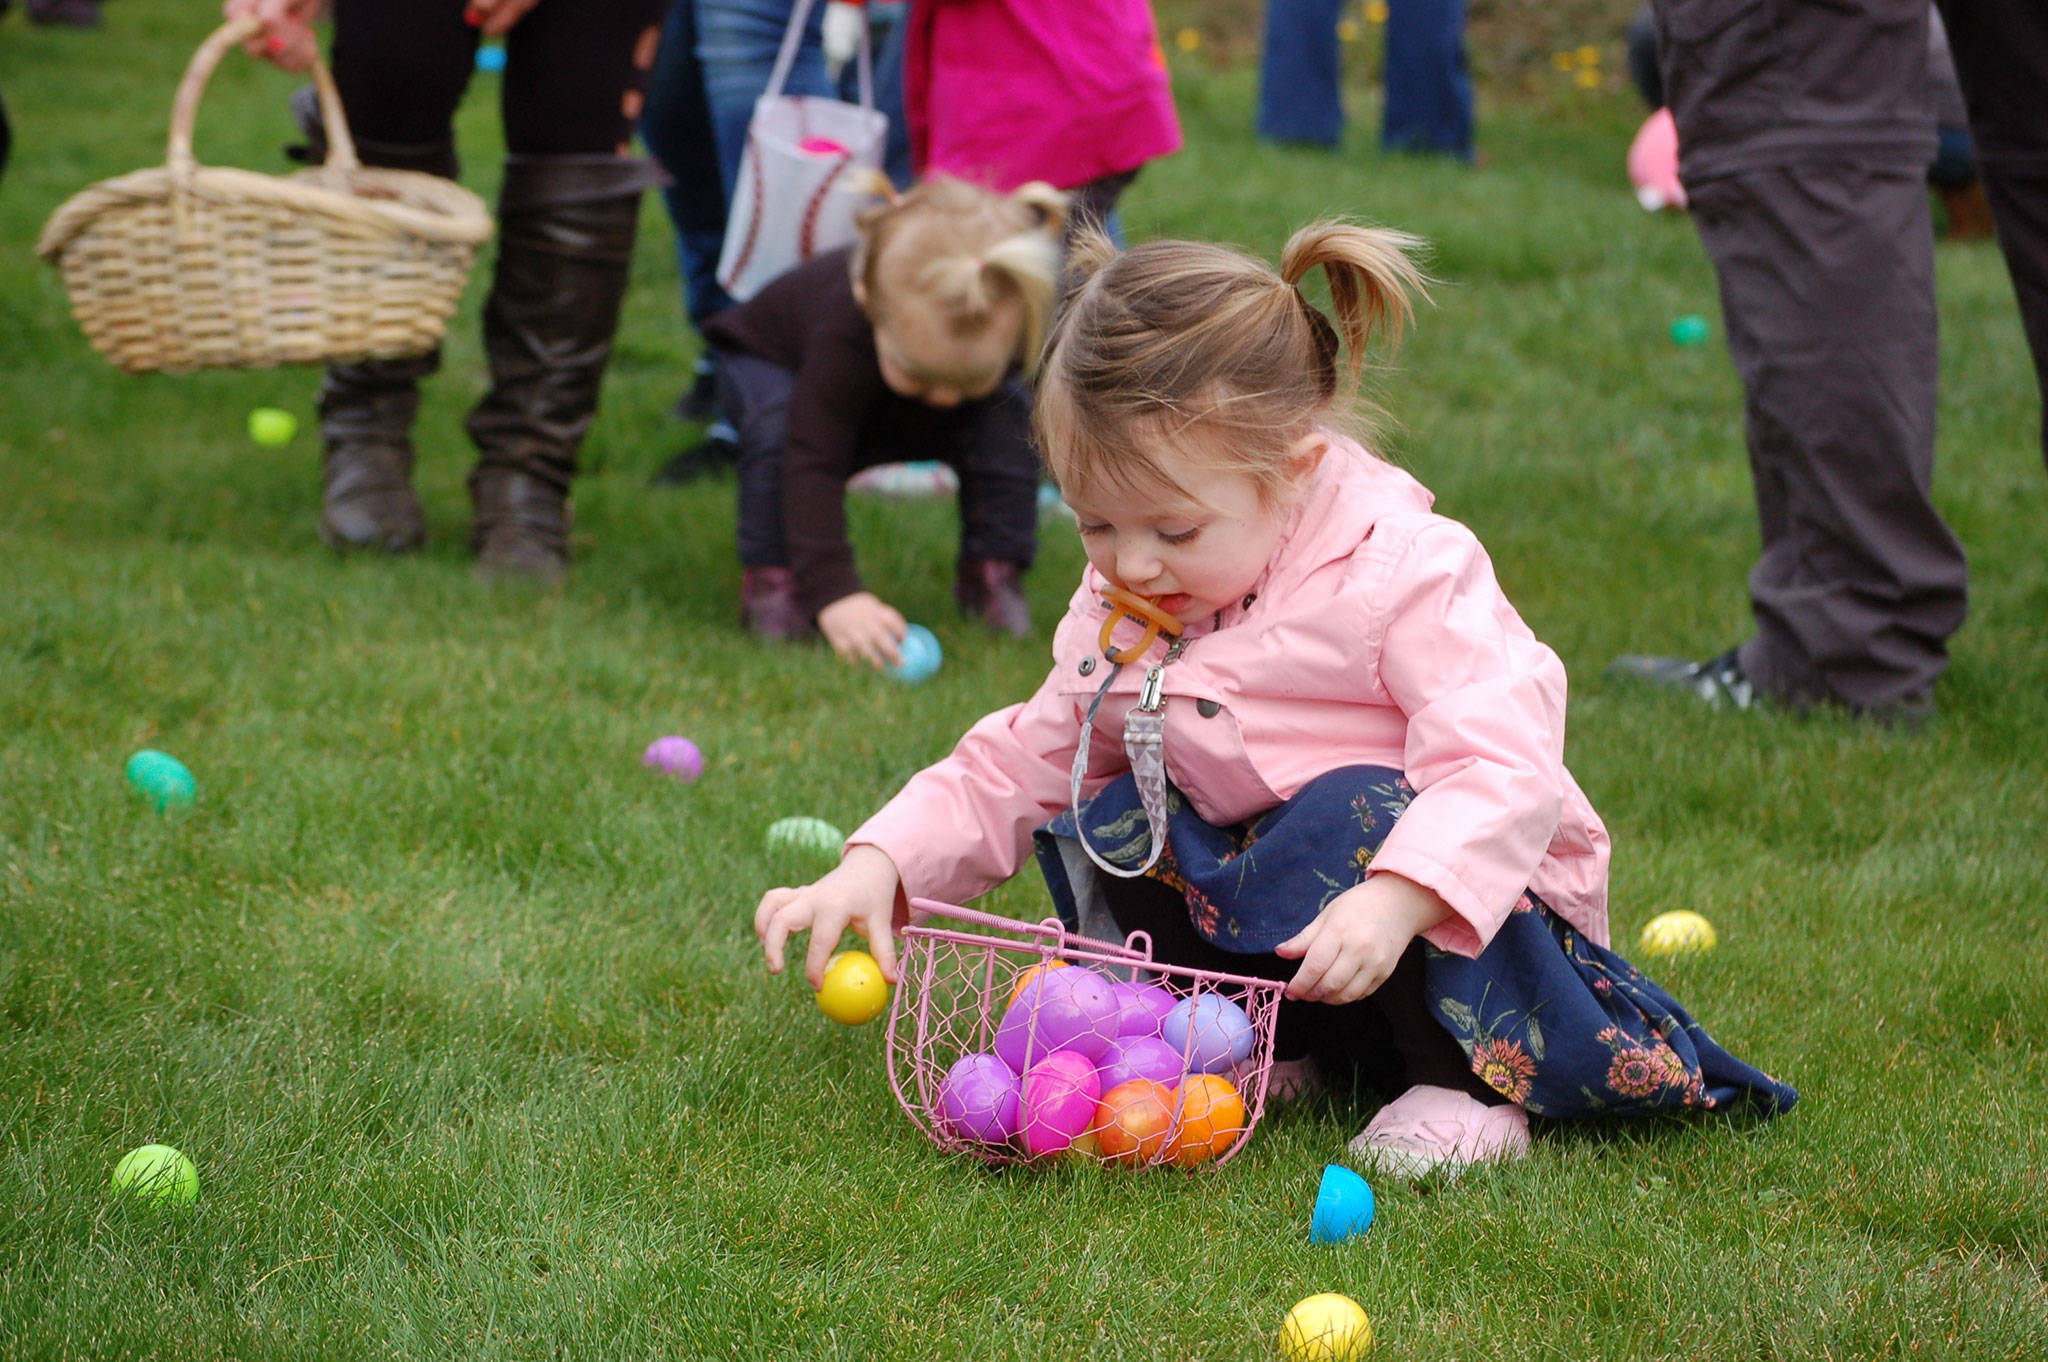 Aria Cummings, 2, of Sequim fills her basket full of plastic eggs on the lawn of the Elks Lodge on March 31 where families and their children gathered for the annual Easter egg hunt. Sequim Gazette photo by Erin Hawkins